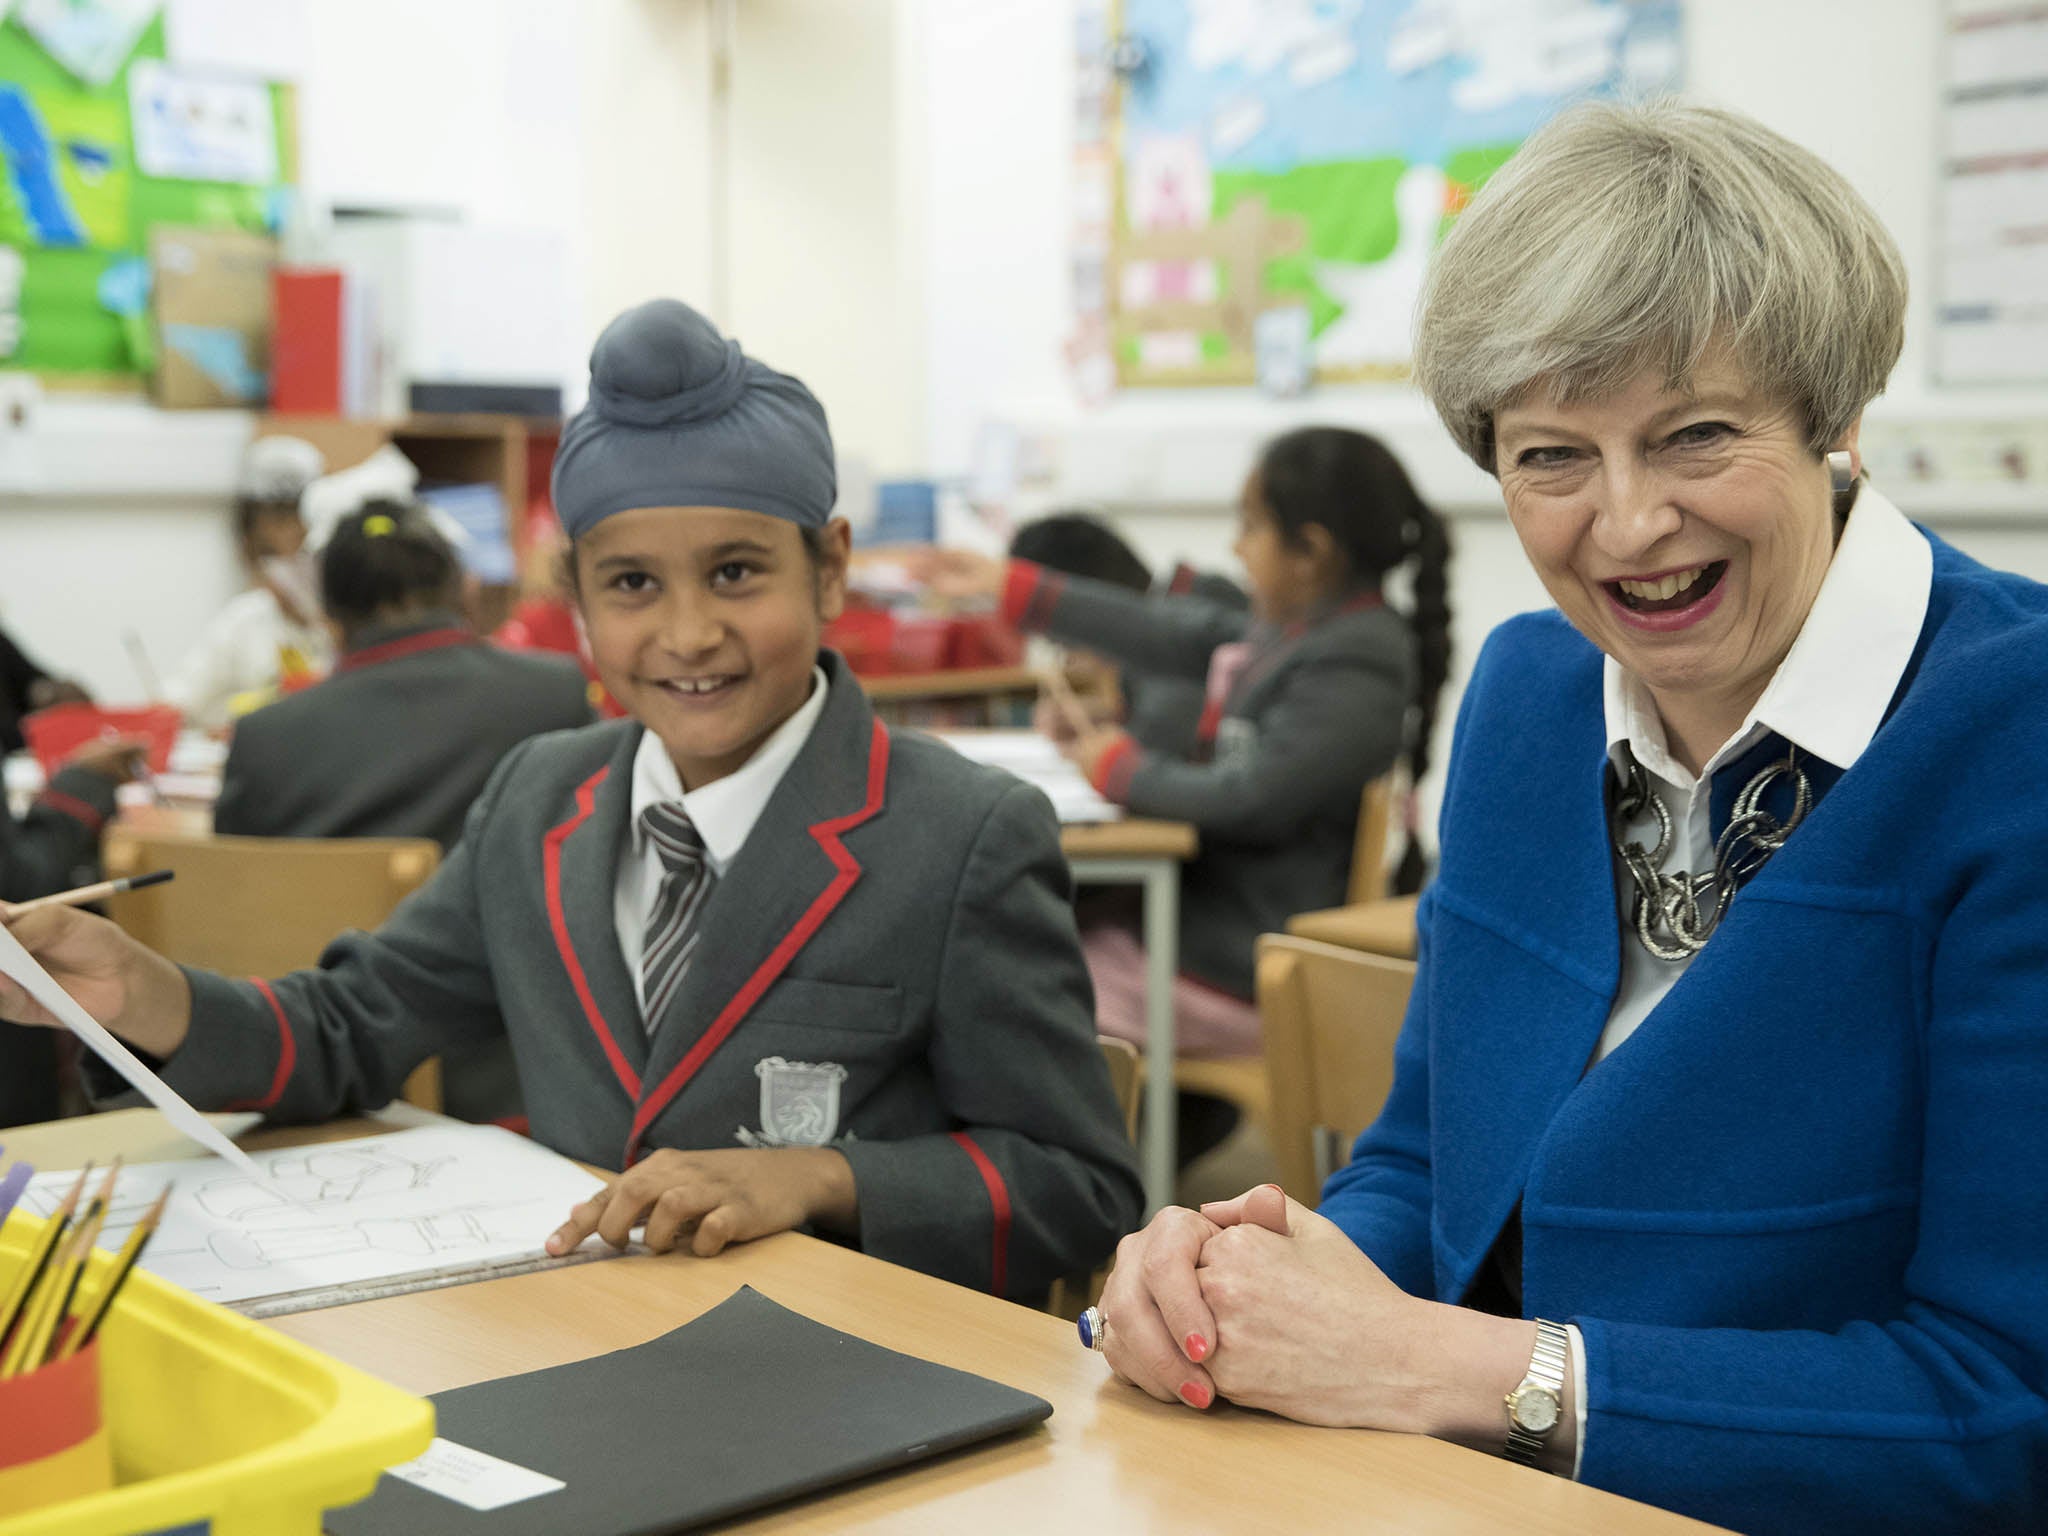 The Tories’ free school breakfast plan covered all the basics, bar paying for the food and staff to operate it